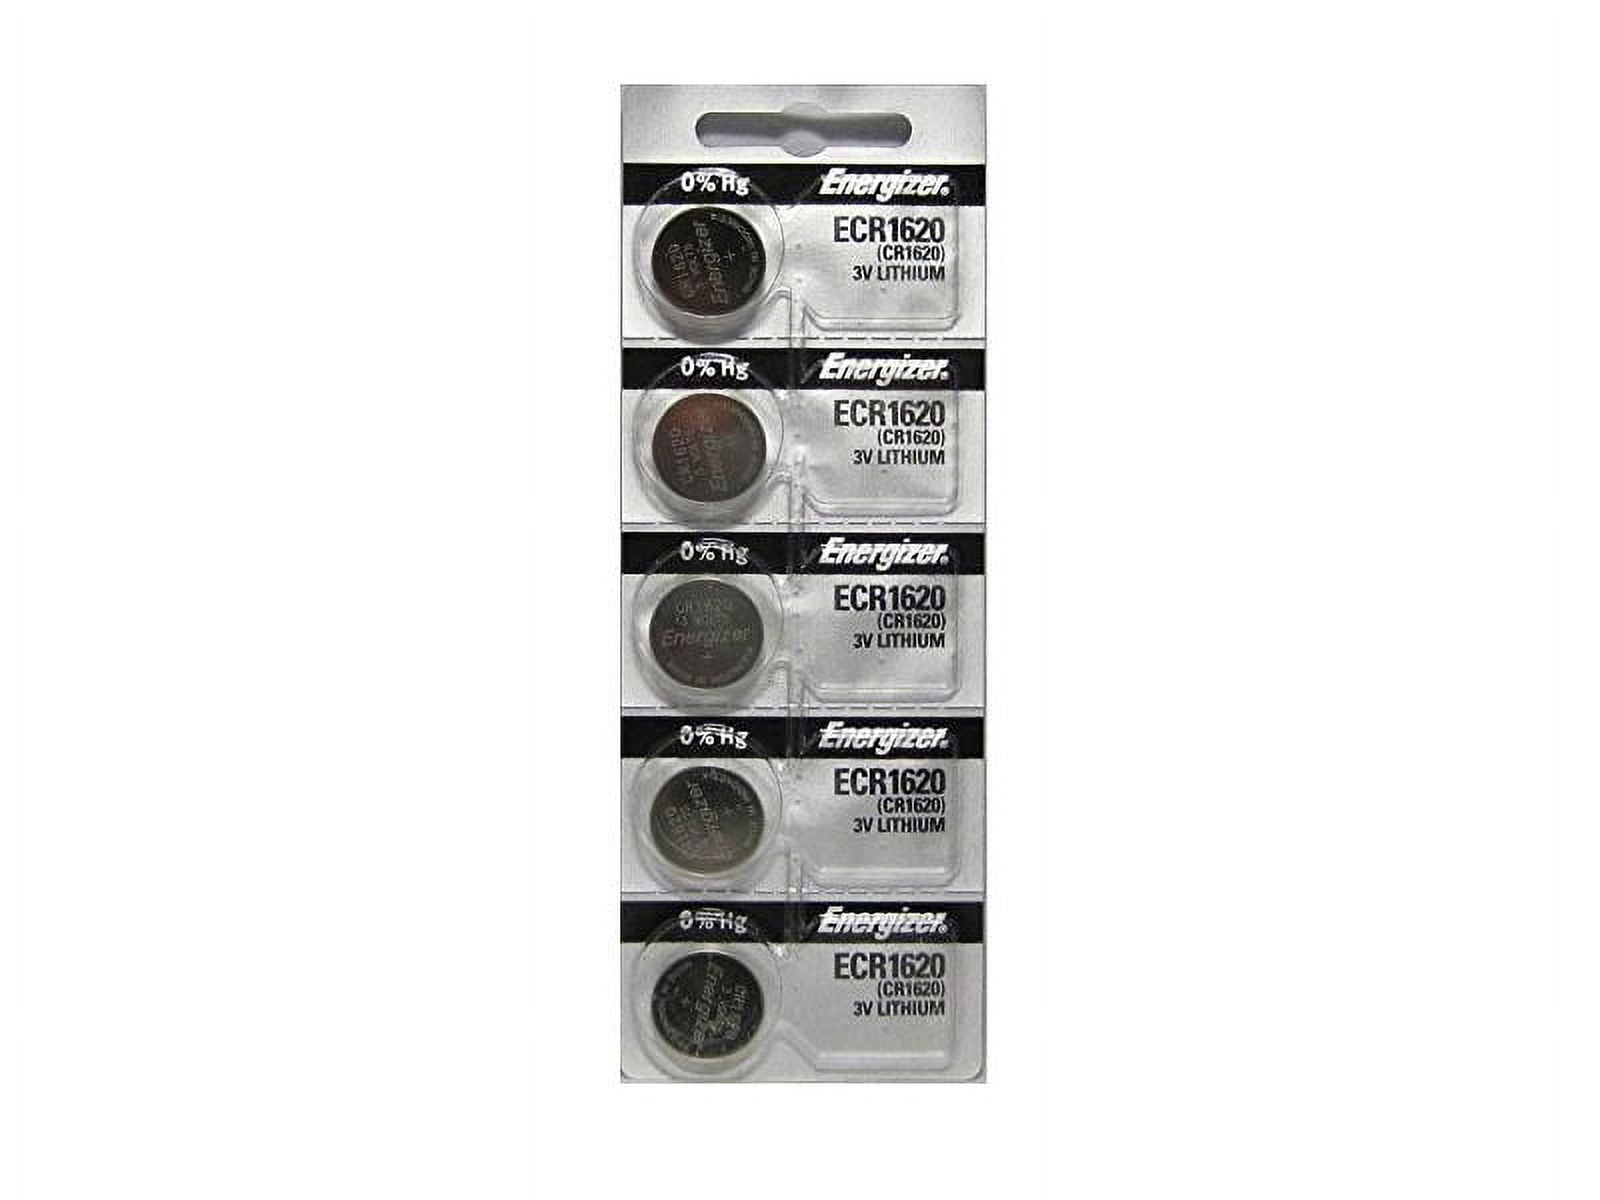 EEMB 3V Lithium Coin Battery CR1620 Top Quality Primary Button Cell